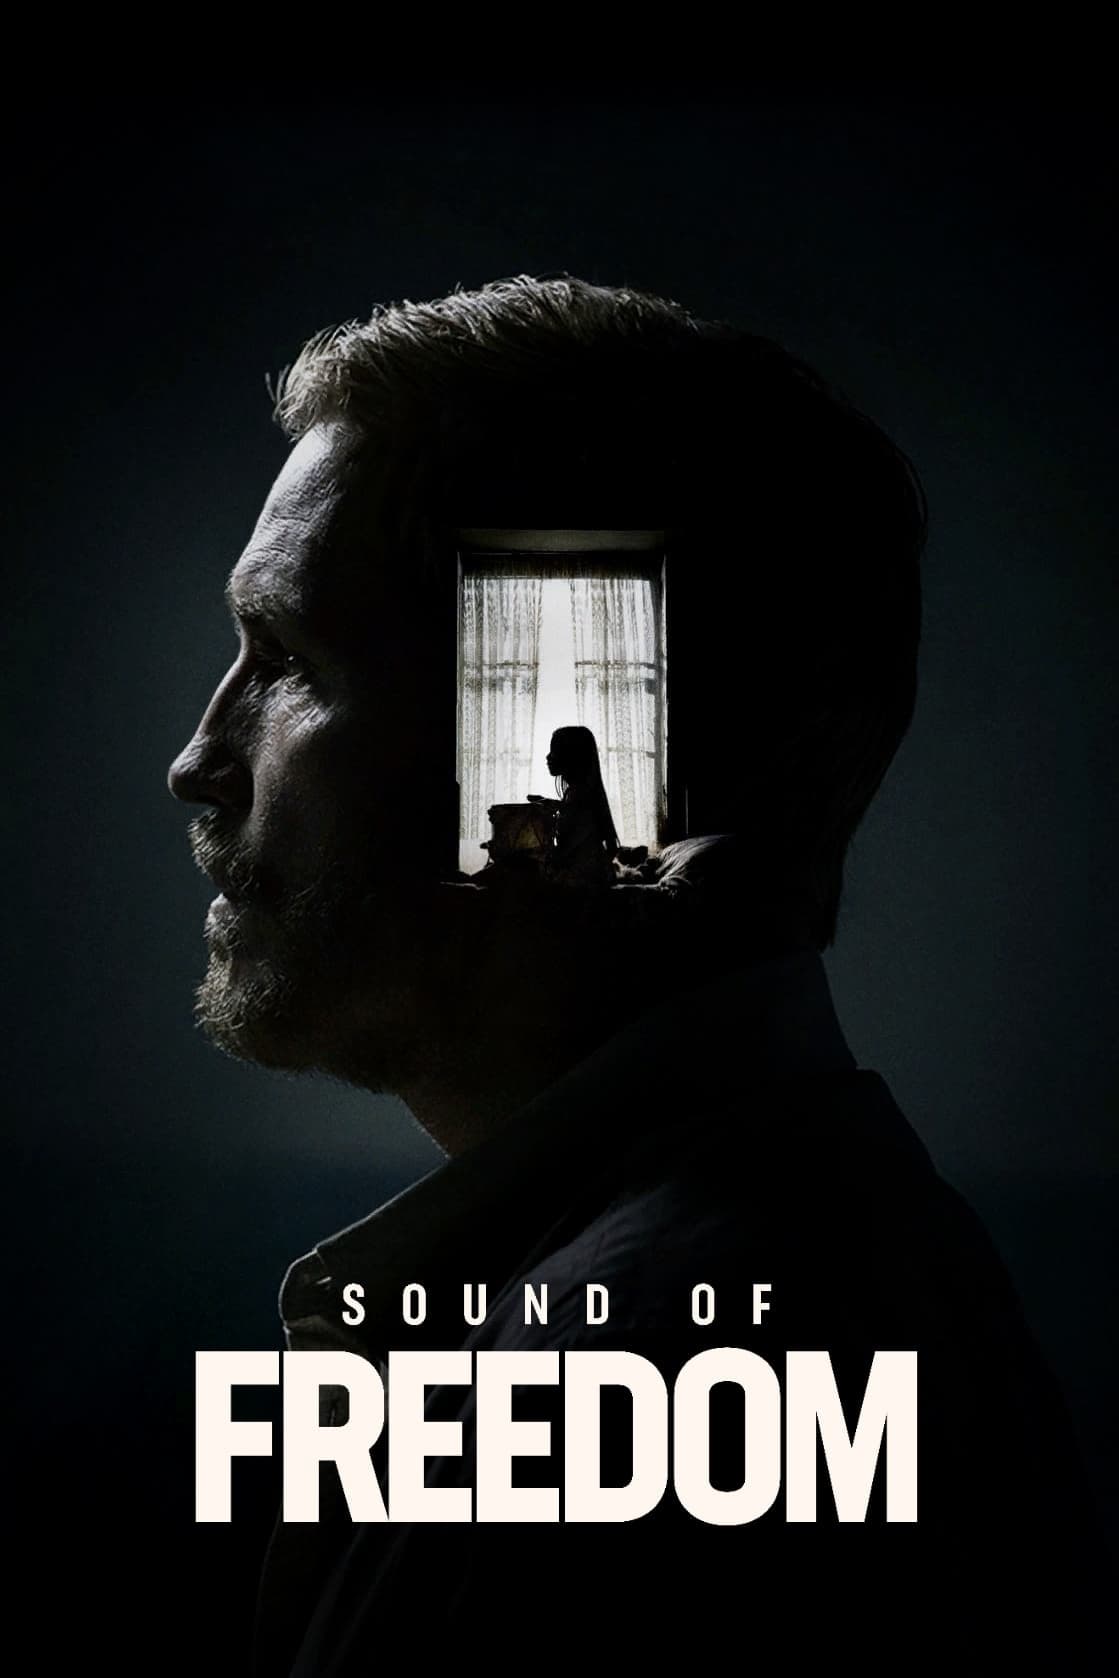 Poster for the movie "Sound of Freedom"